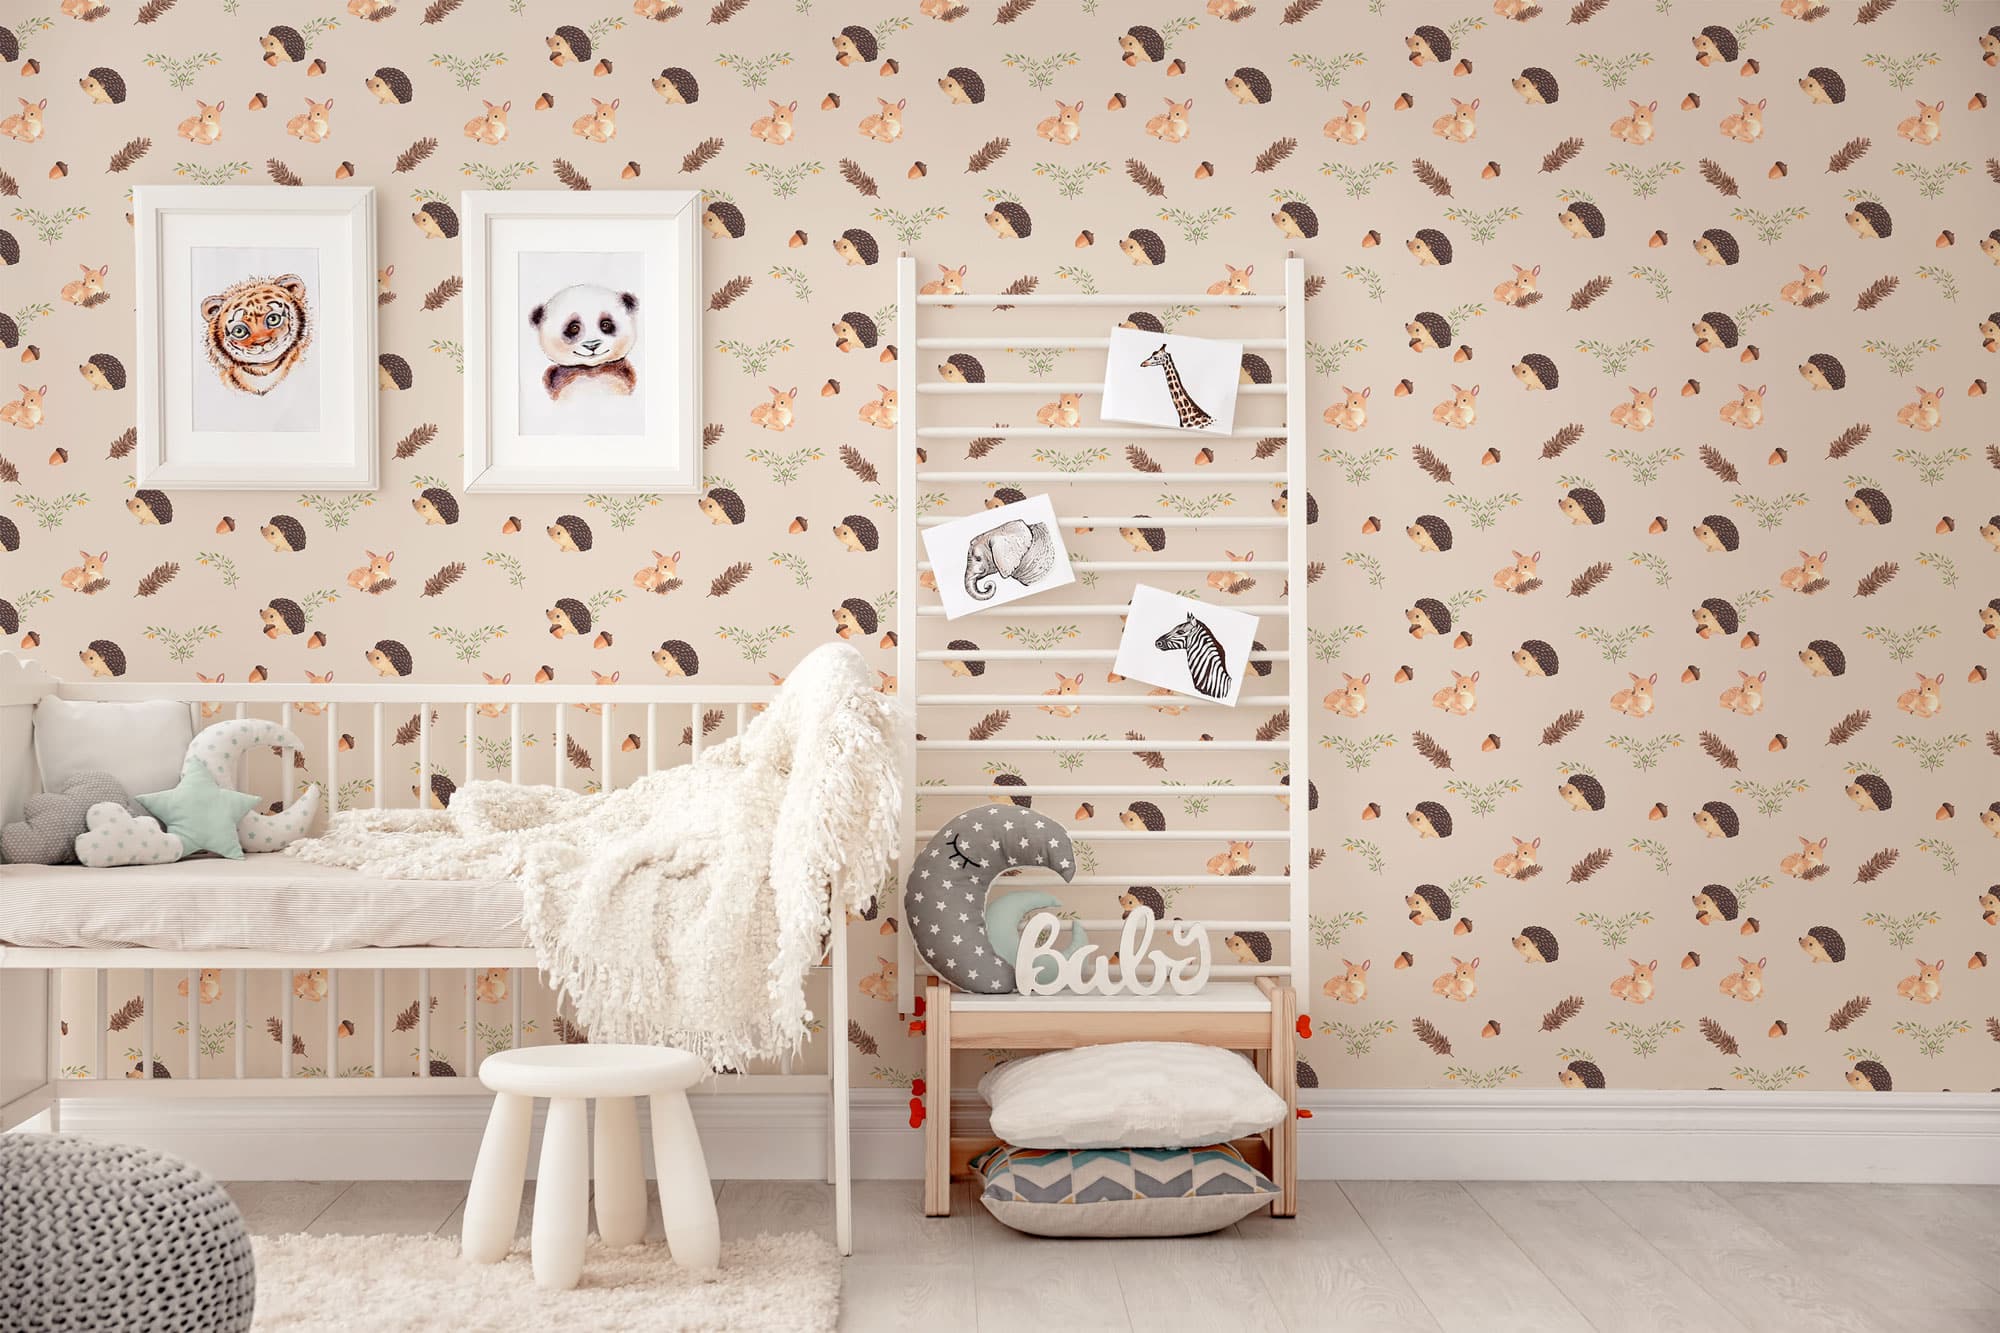 Nursery wallpaper - Peel and Stick or Non-Pasted